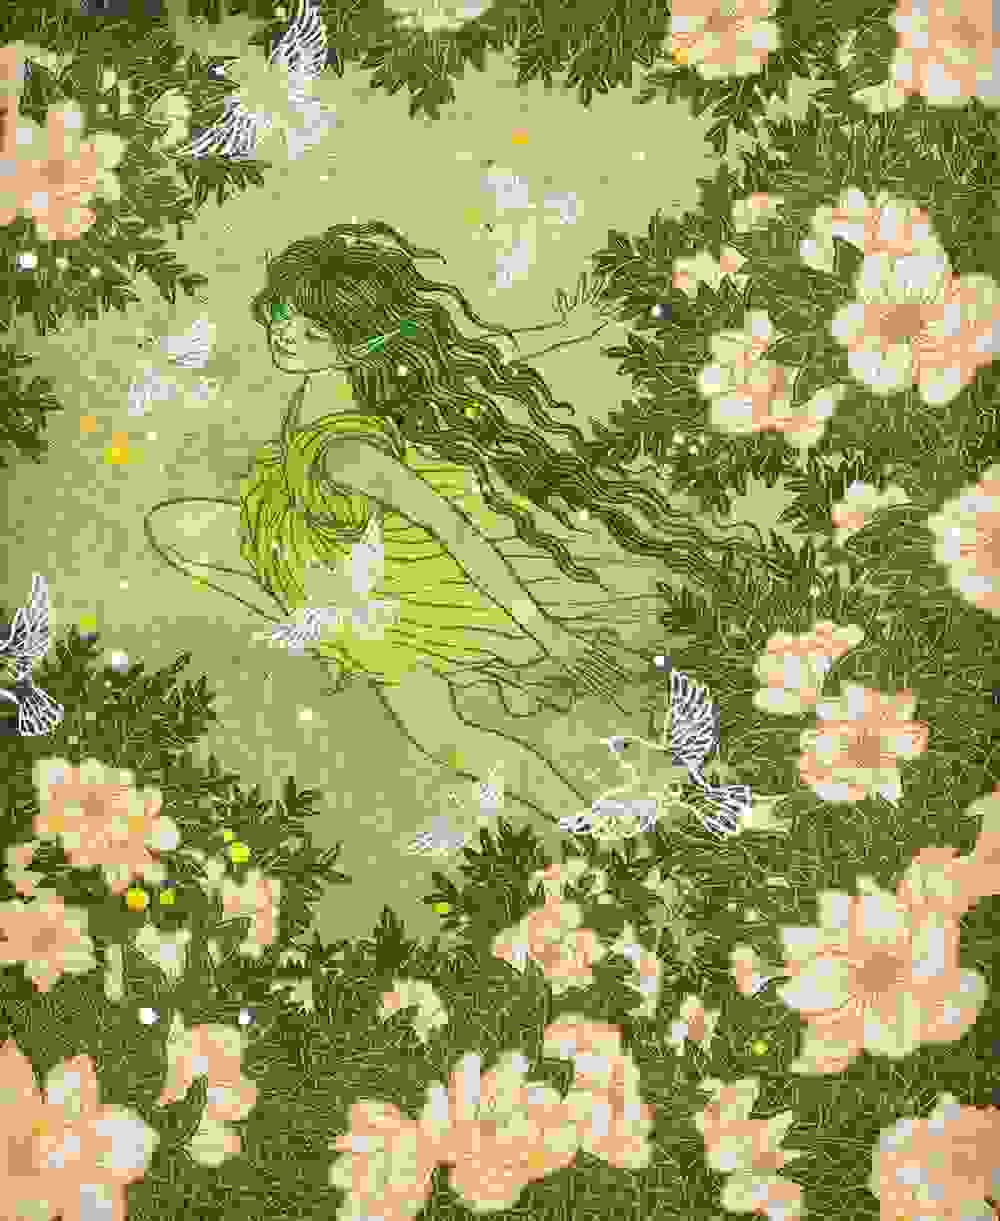 A green elf girl with long hair and a green dress frolics through a field of peach colored flowers.